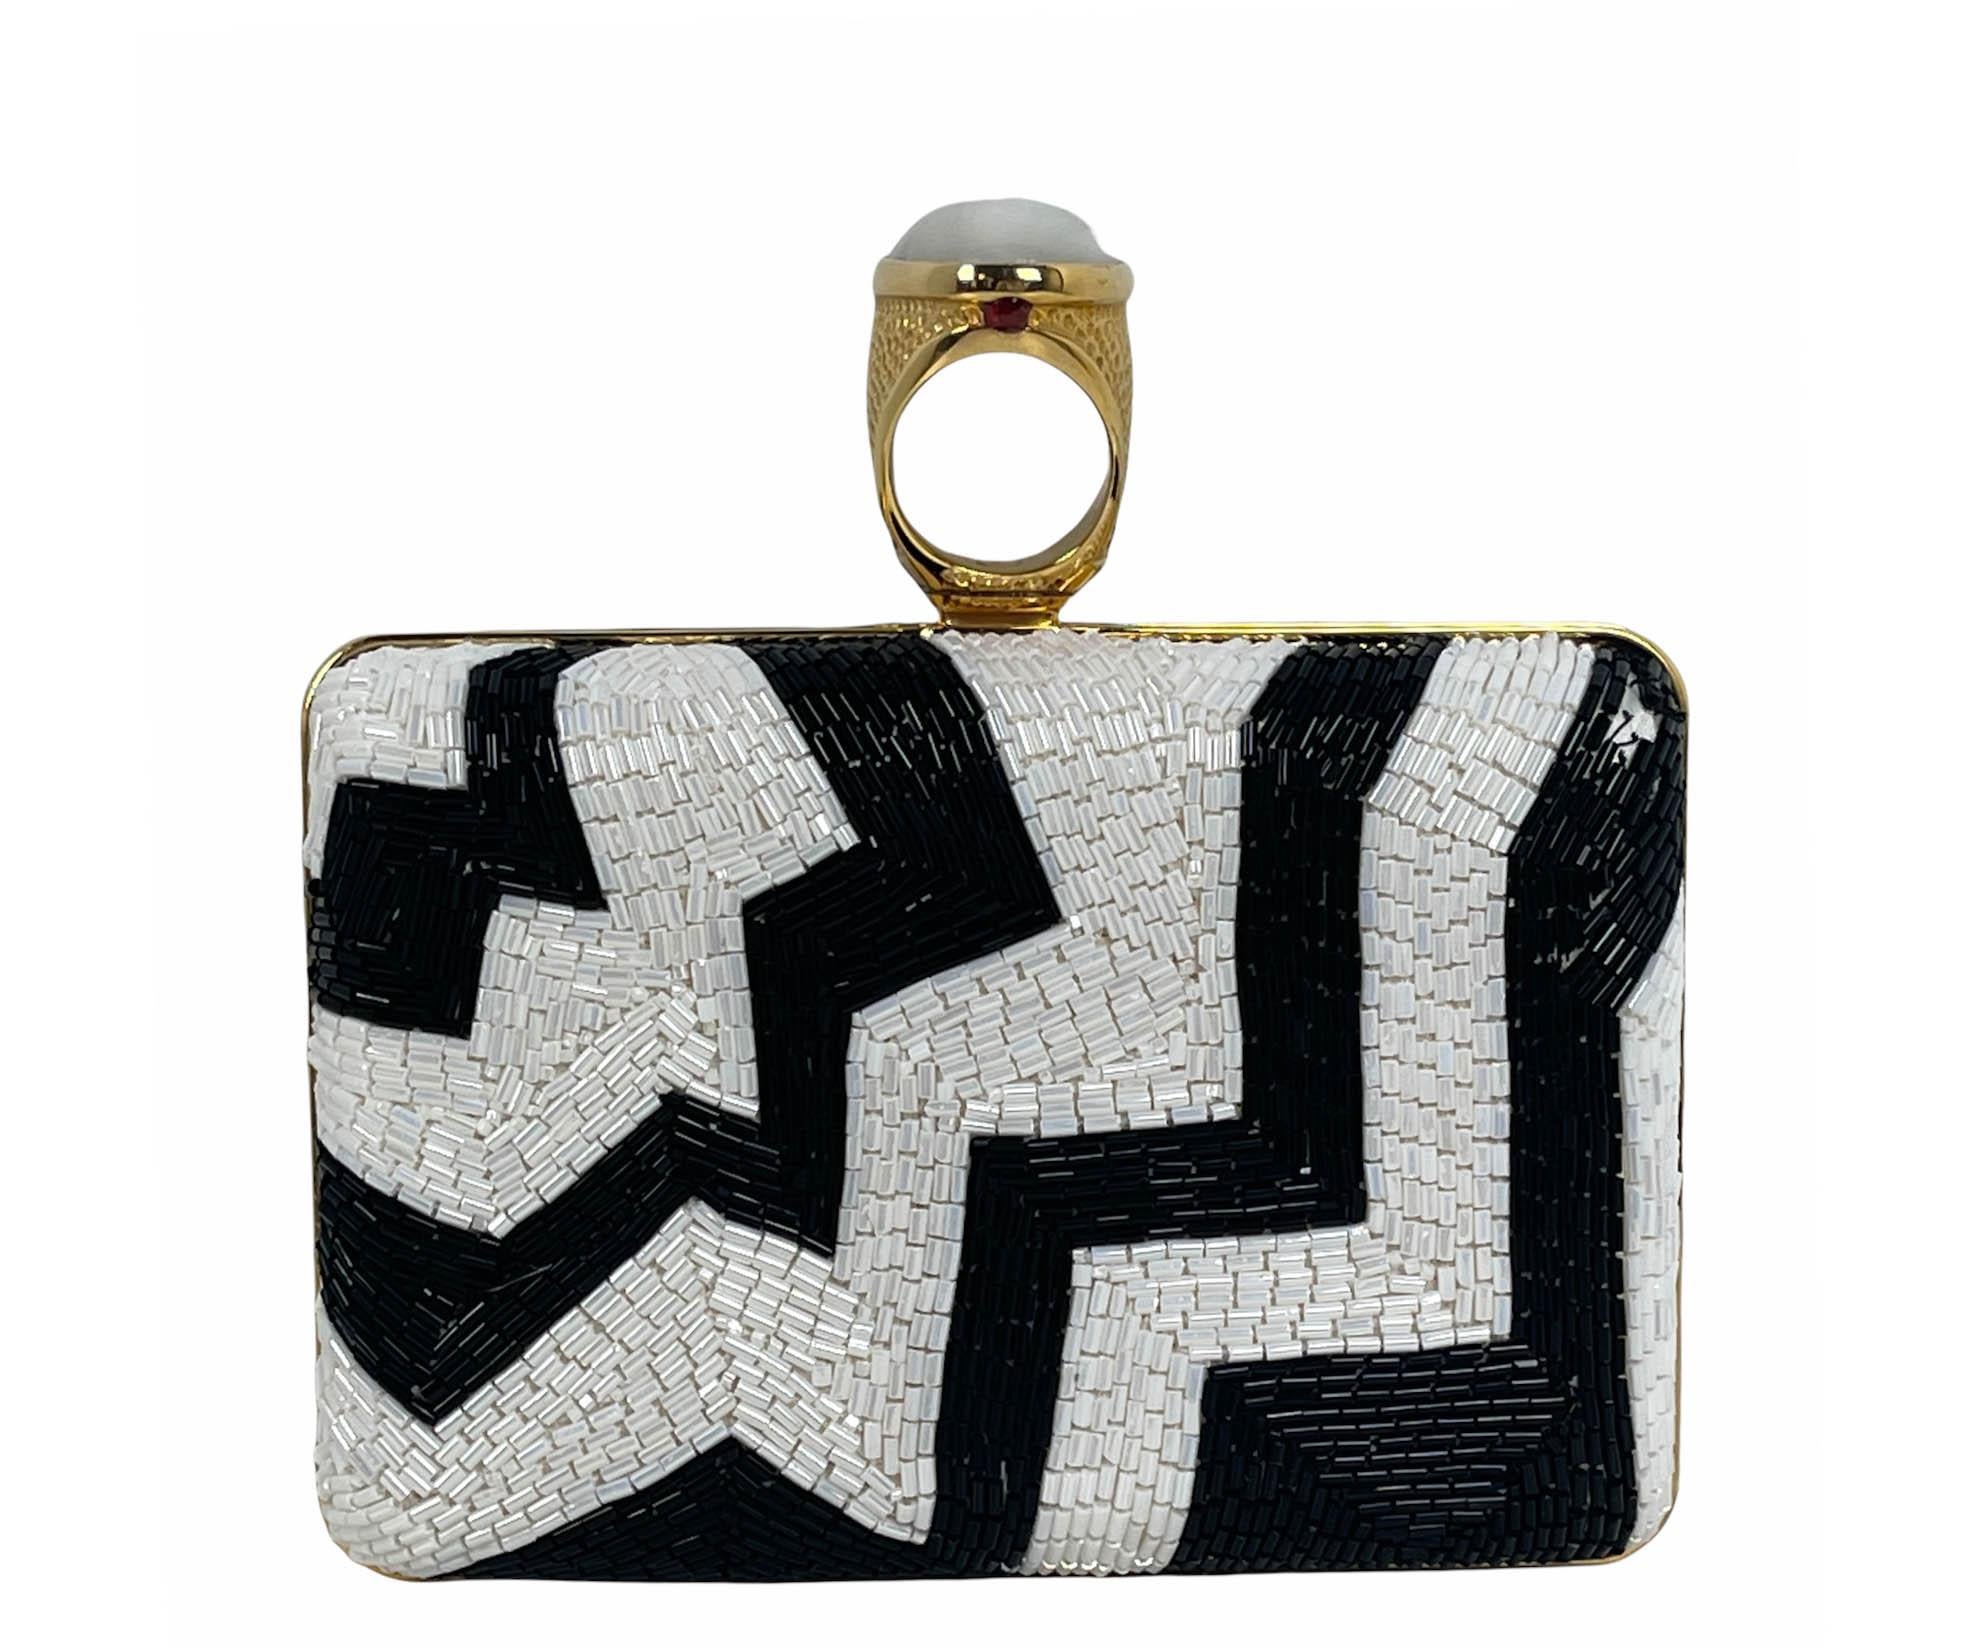 Tom Ford Black & White Beaded Ring Clutch Bag

Made In: Italy
Color: Black and white
Hardware: Goldtone
Materials: Beaded with hammered oval cabochon ring clasp
Lining: Black alcantara
Closure/Opening: Frame
Exterior Pockets: None
Interior Pockets: